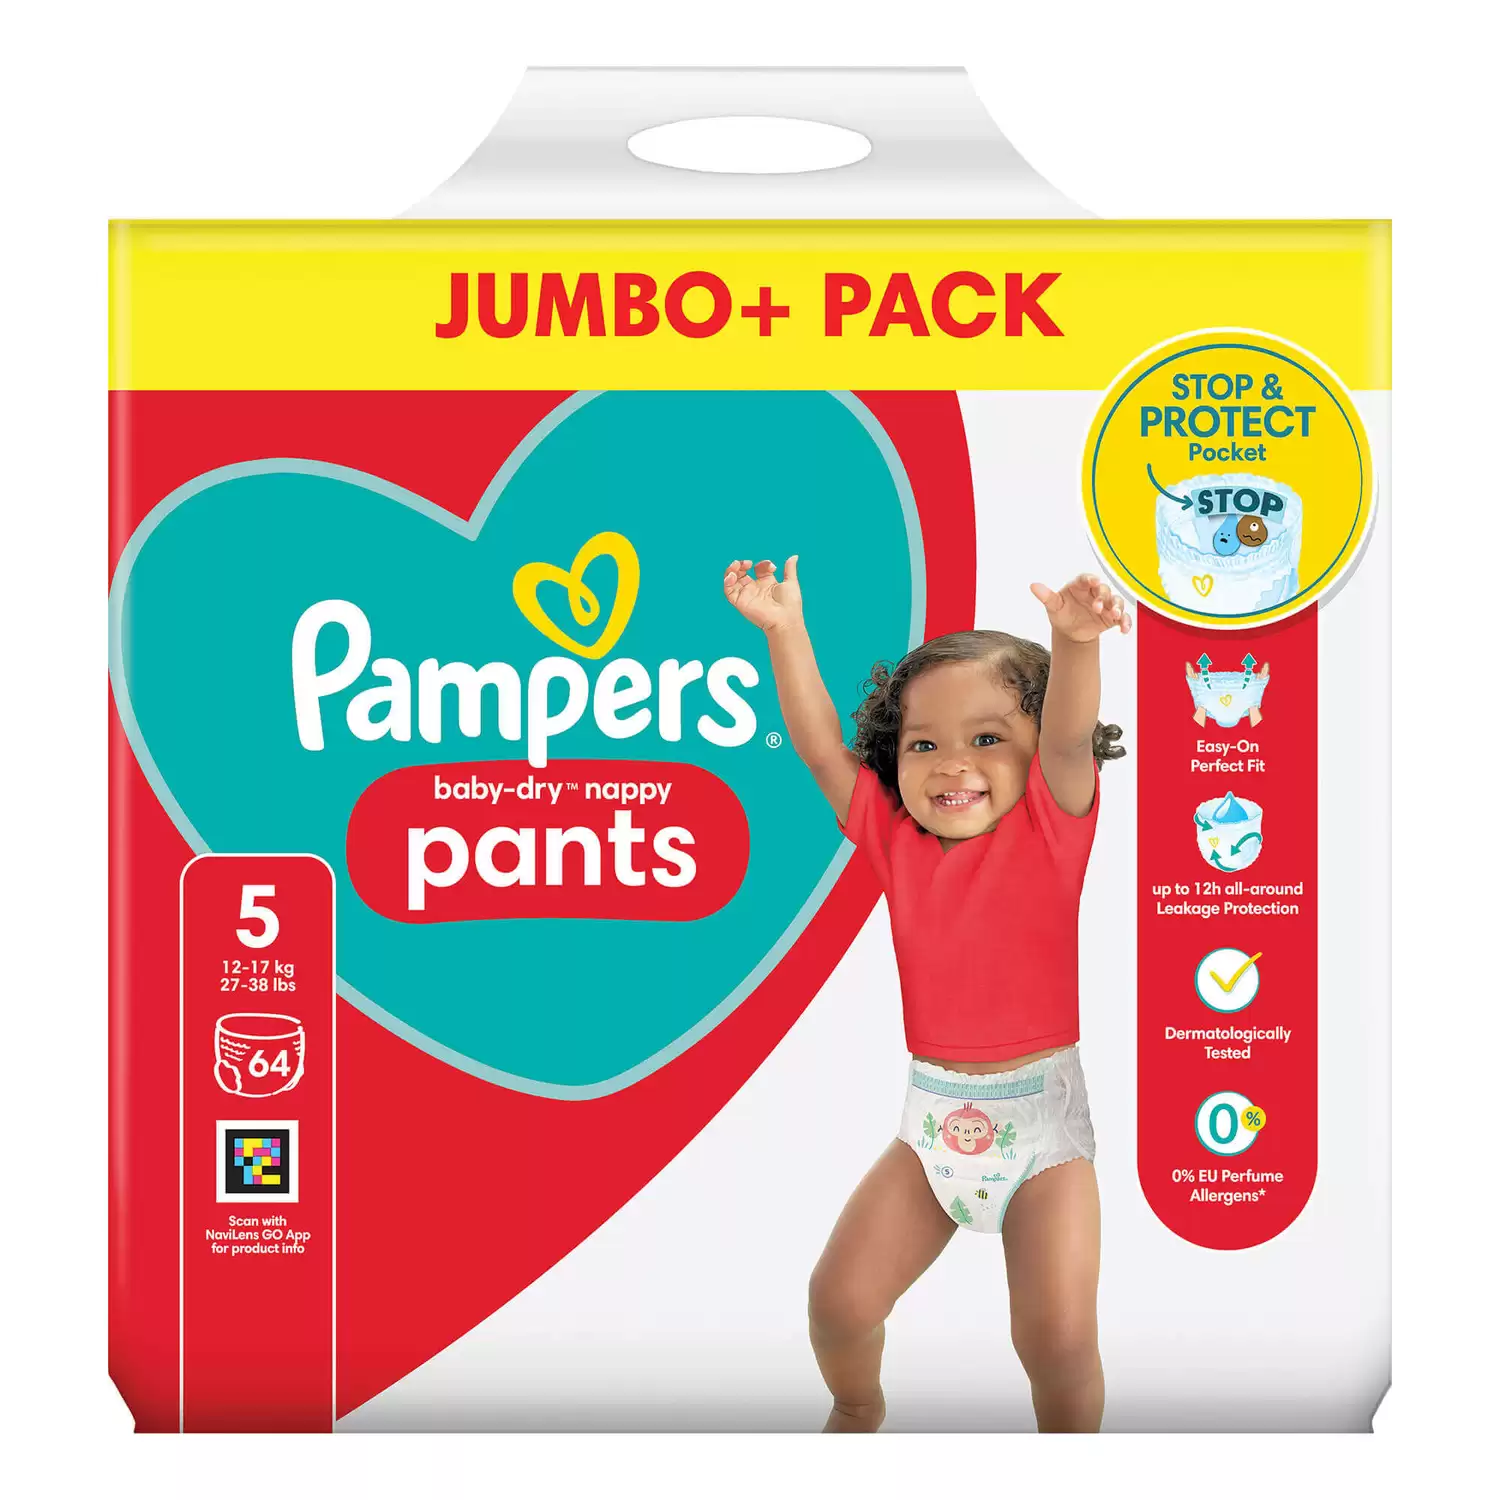 Pampers Baby Dry Nappy Pants Size 5 64 Pack - Gompels - Care